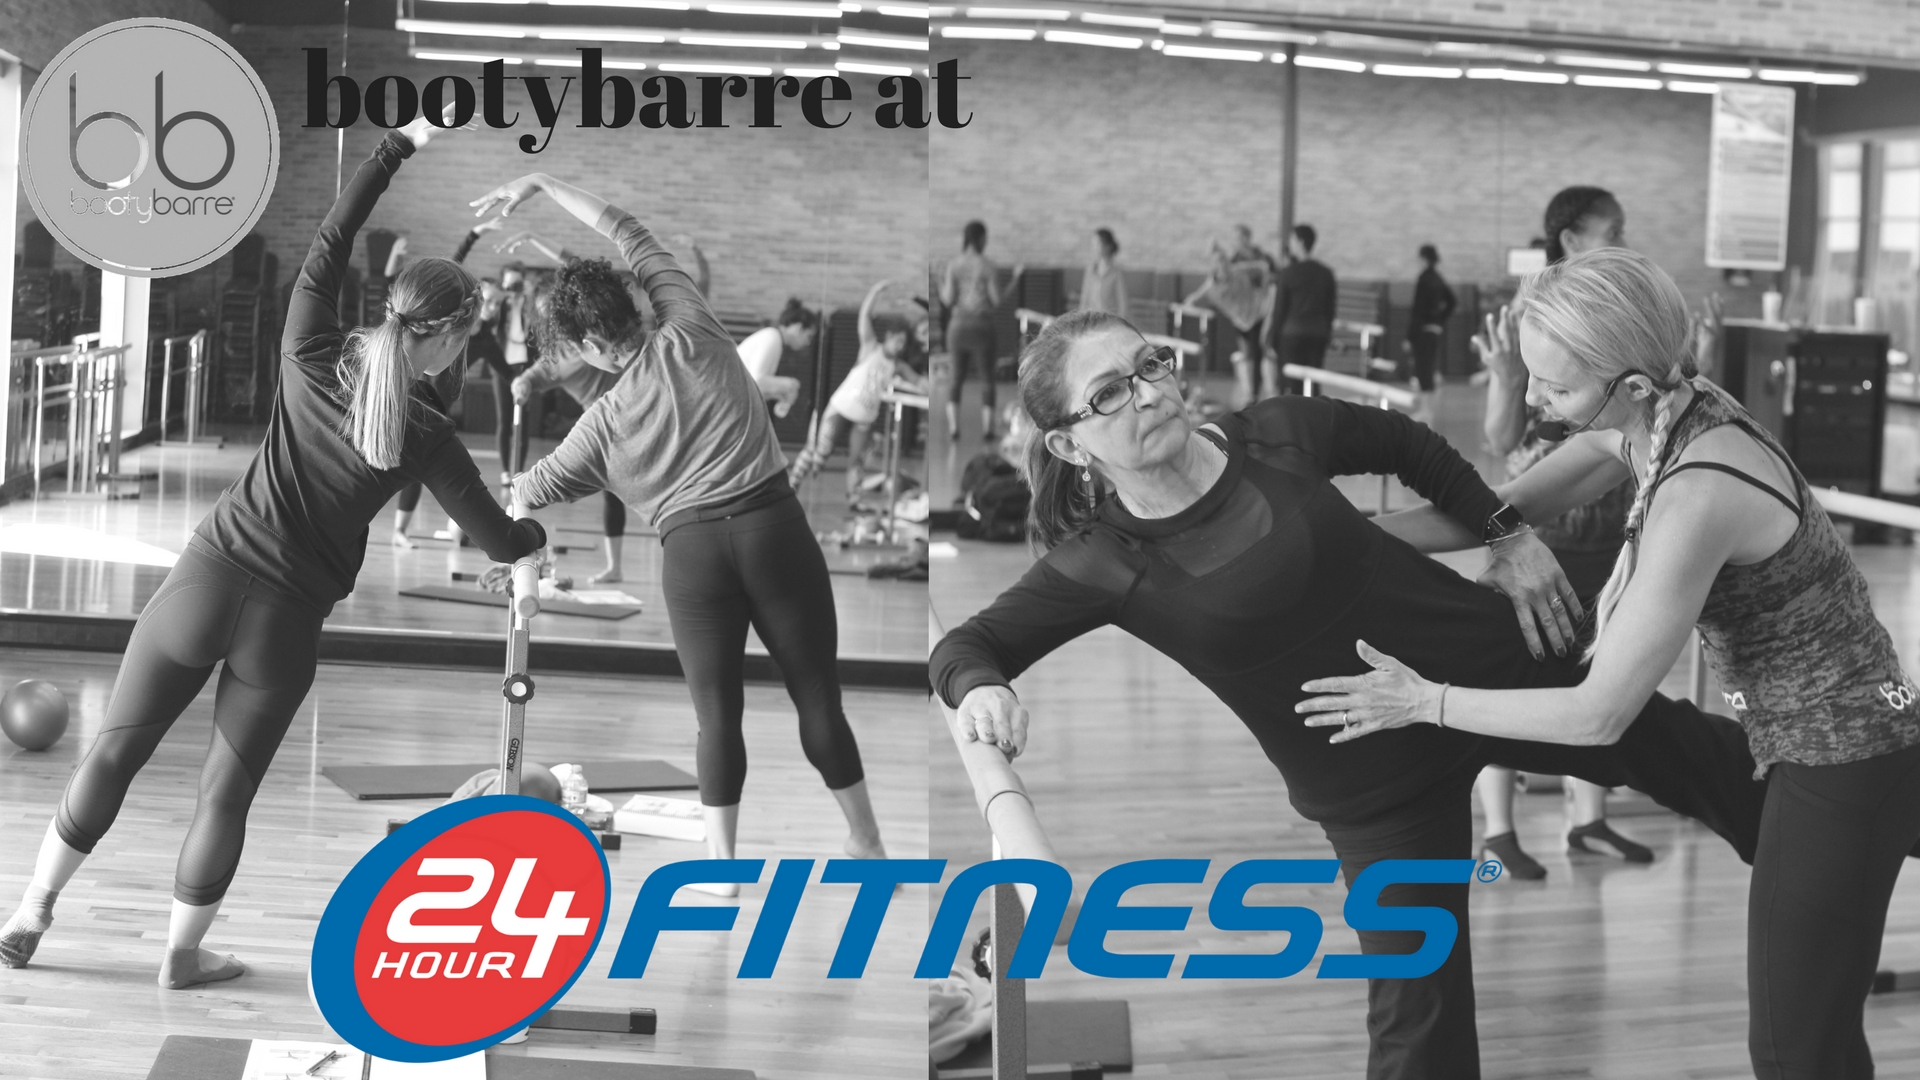 bootybarre at 24 Hour Fitness - BootyBarre